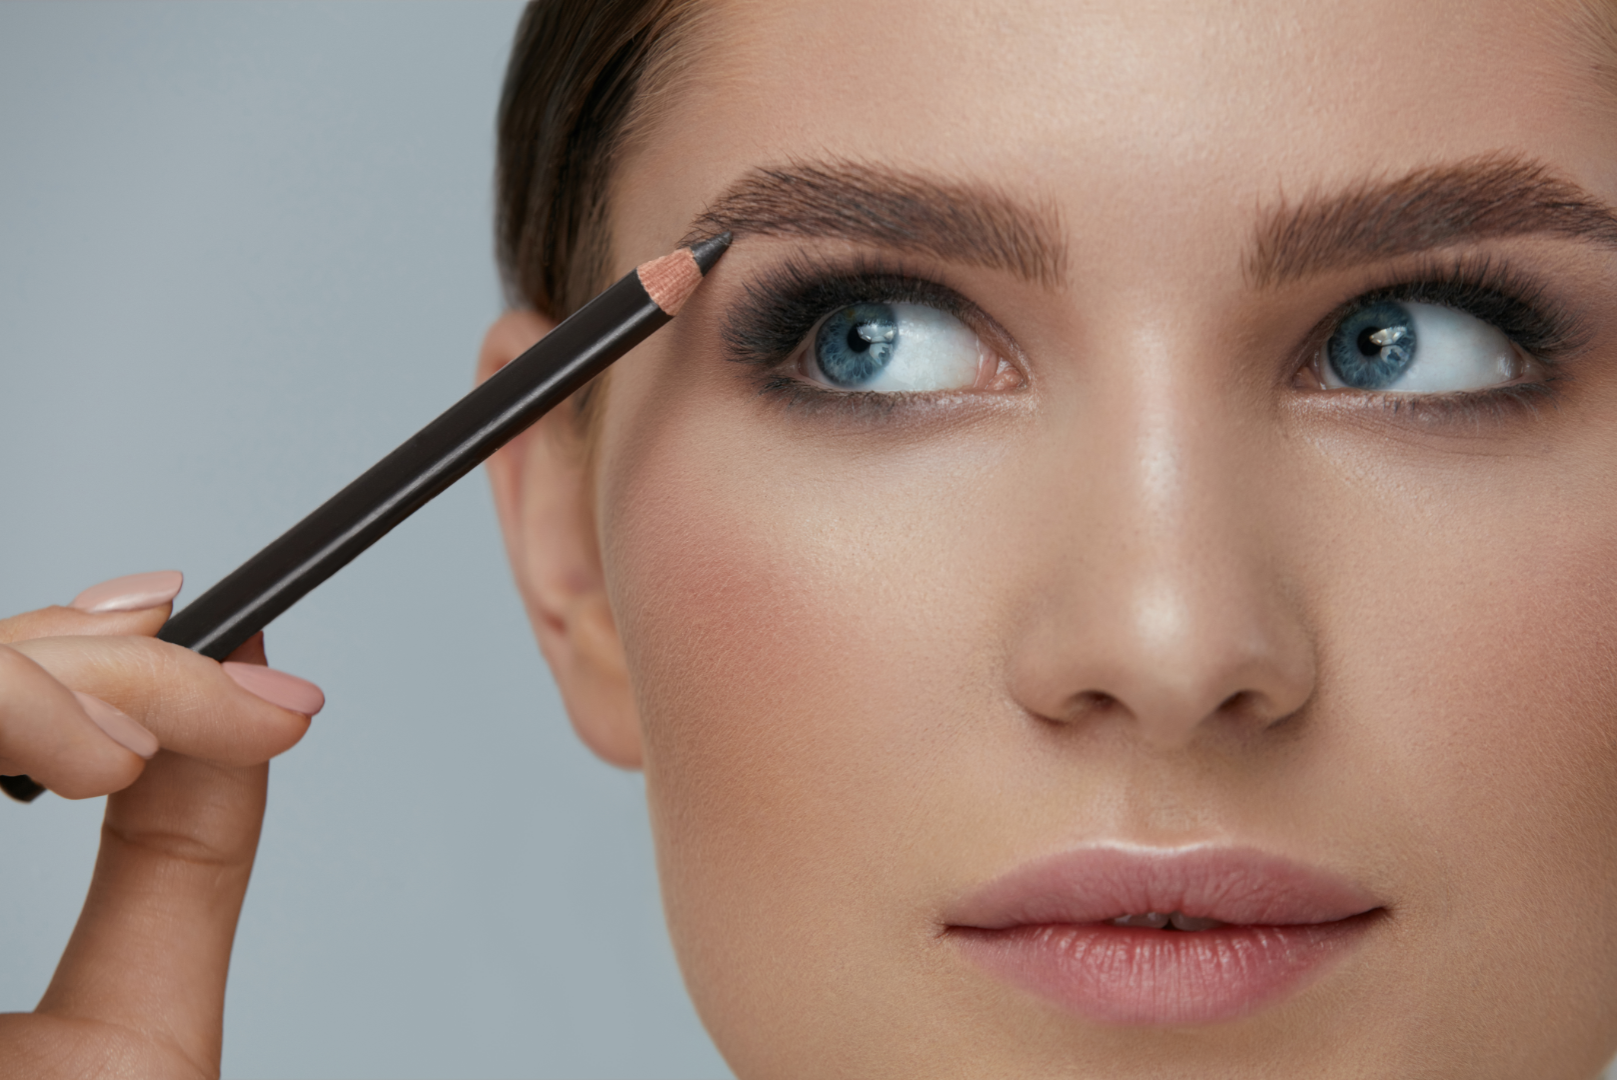 Eyebrow Envy: 5 Things You'll Need to Look Your Best At Any Event